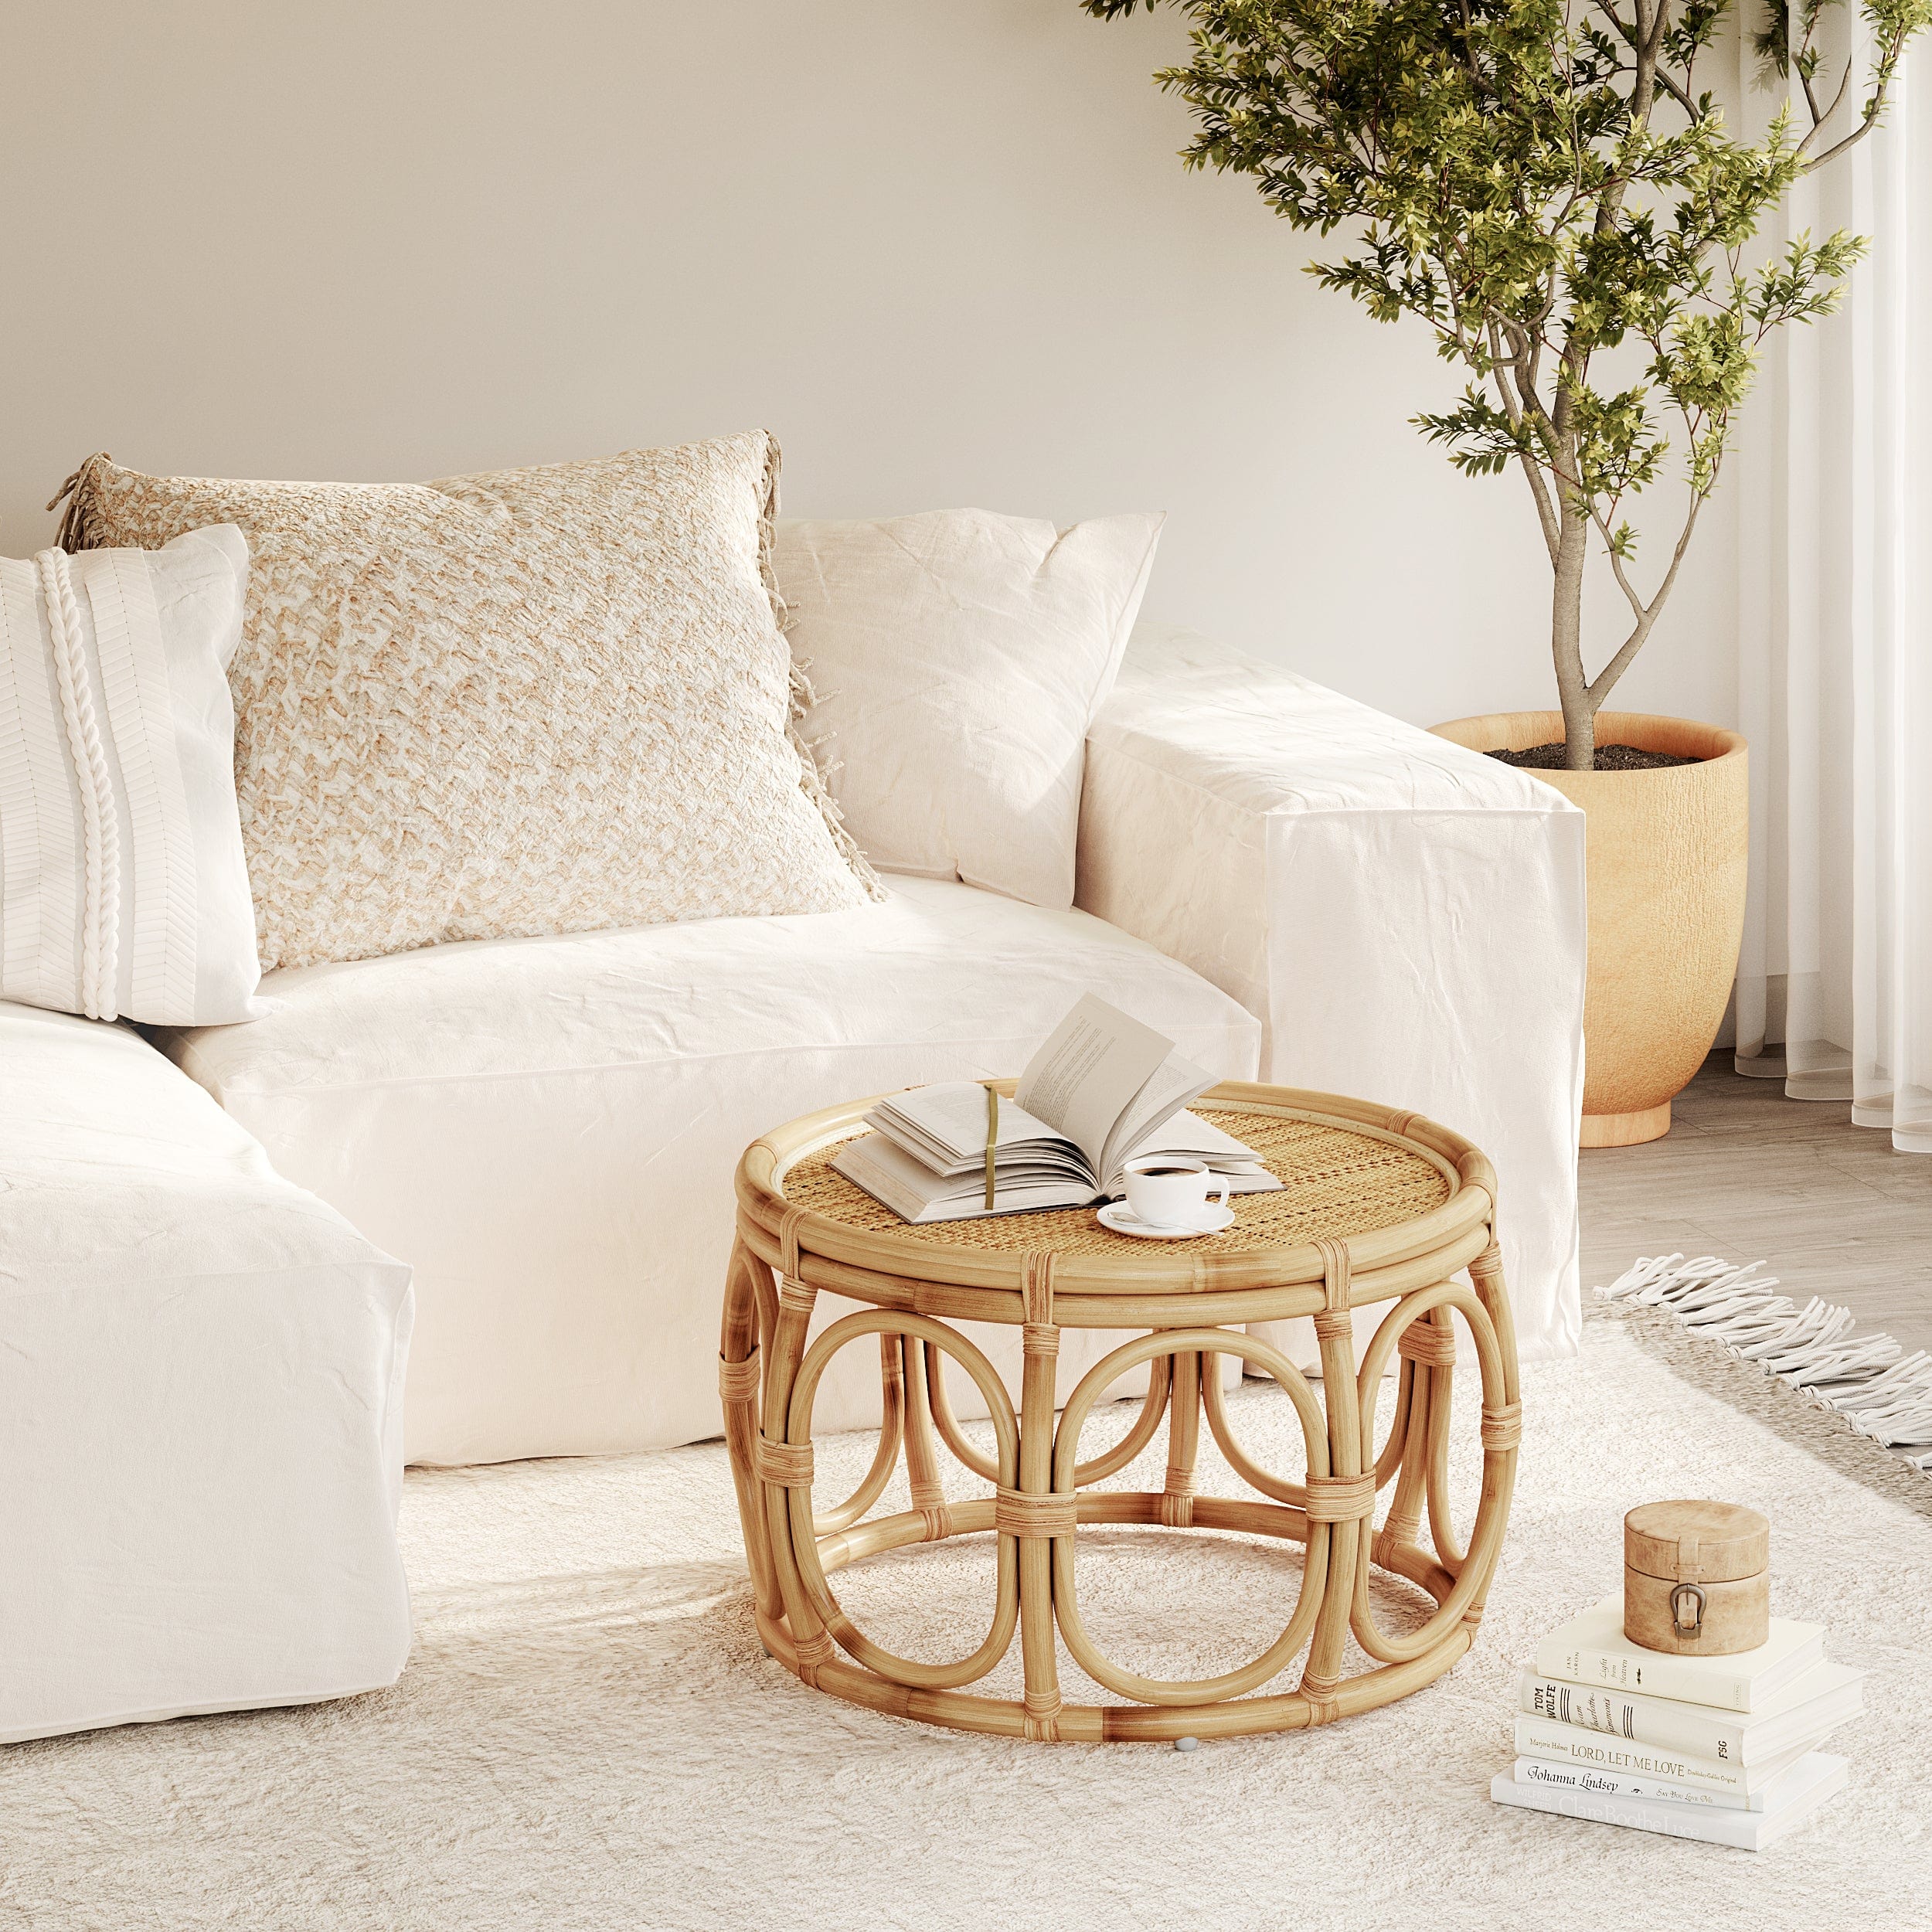 The role of the sofa and coffee table as the centerpieces of a living room